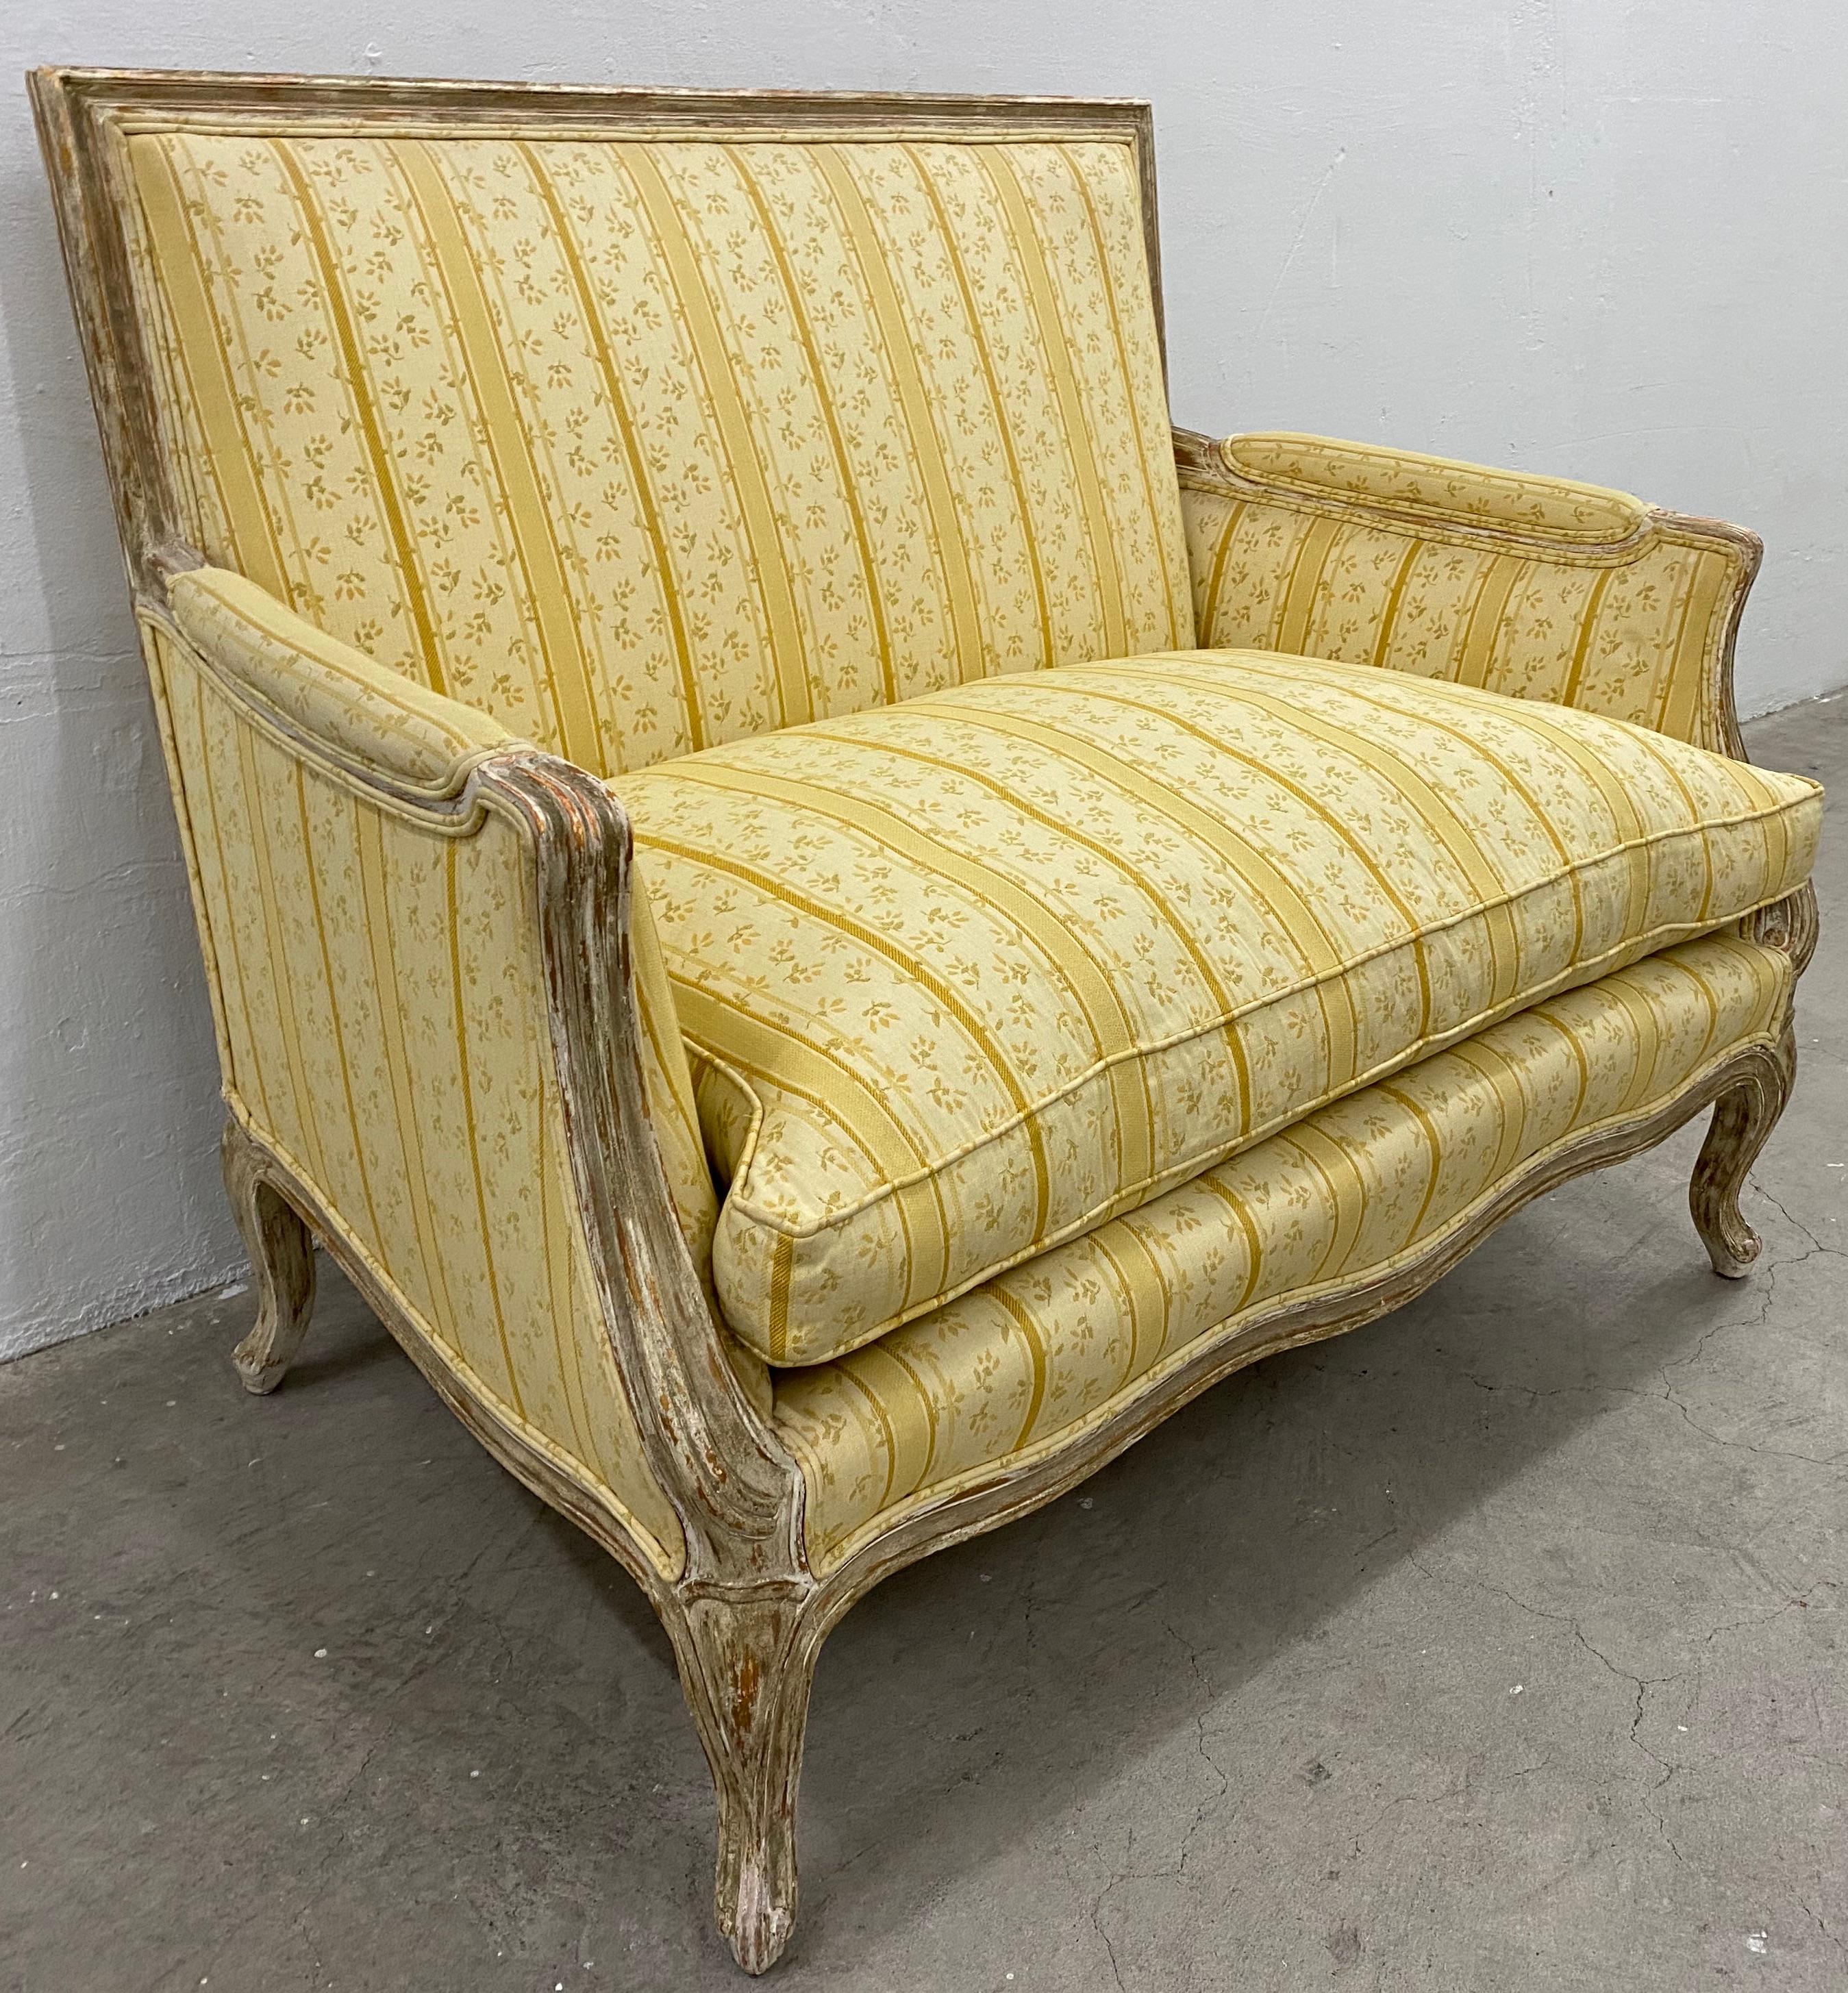 Early 20th century French style settee

Sumptuous hand carved settee with an elegant down filled upholstery.

Measures: 43.5